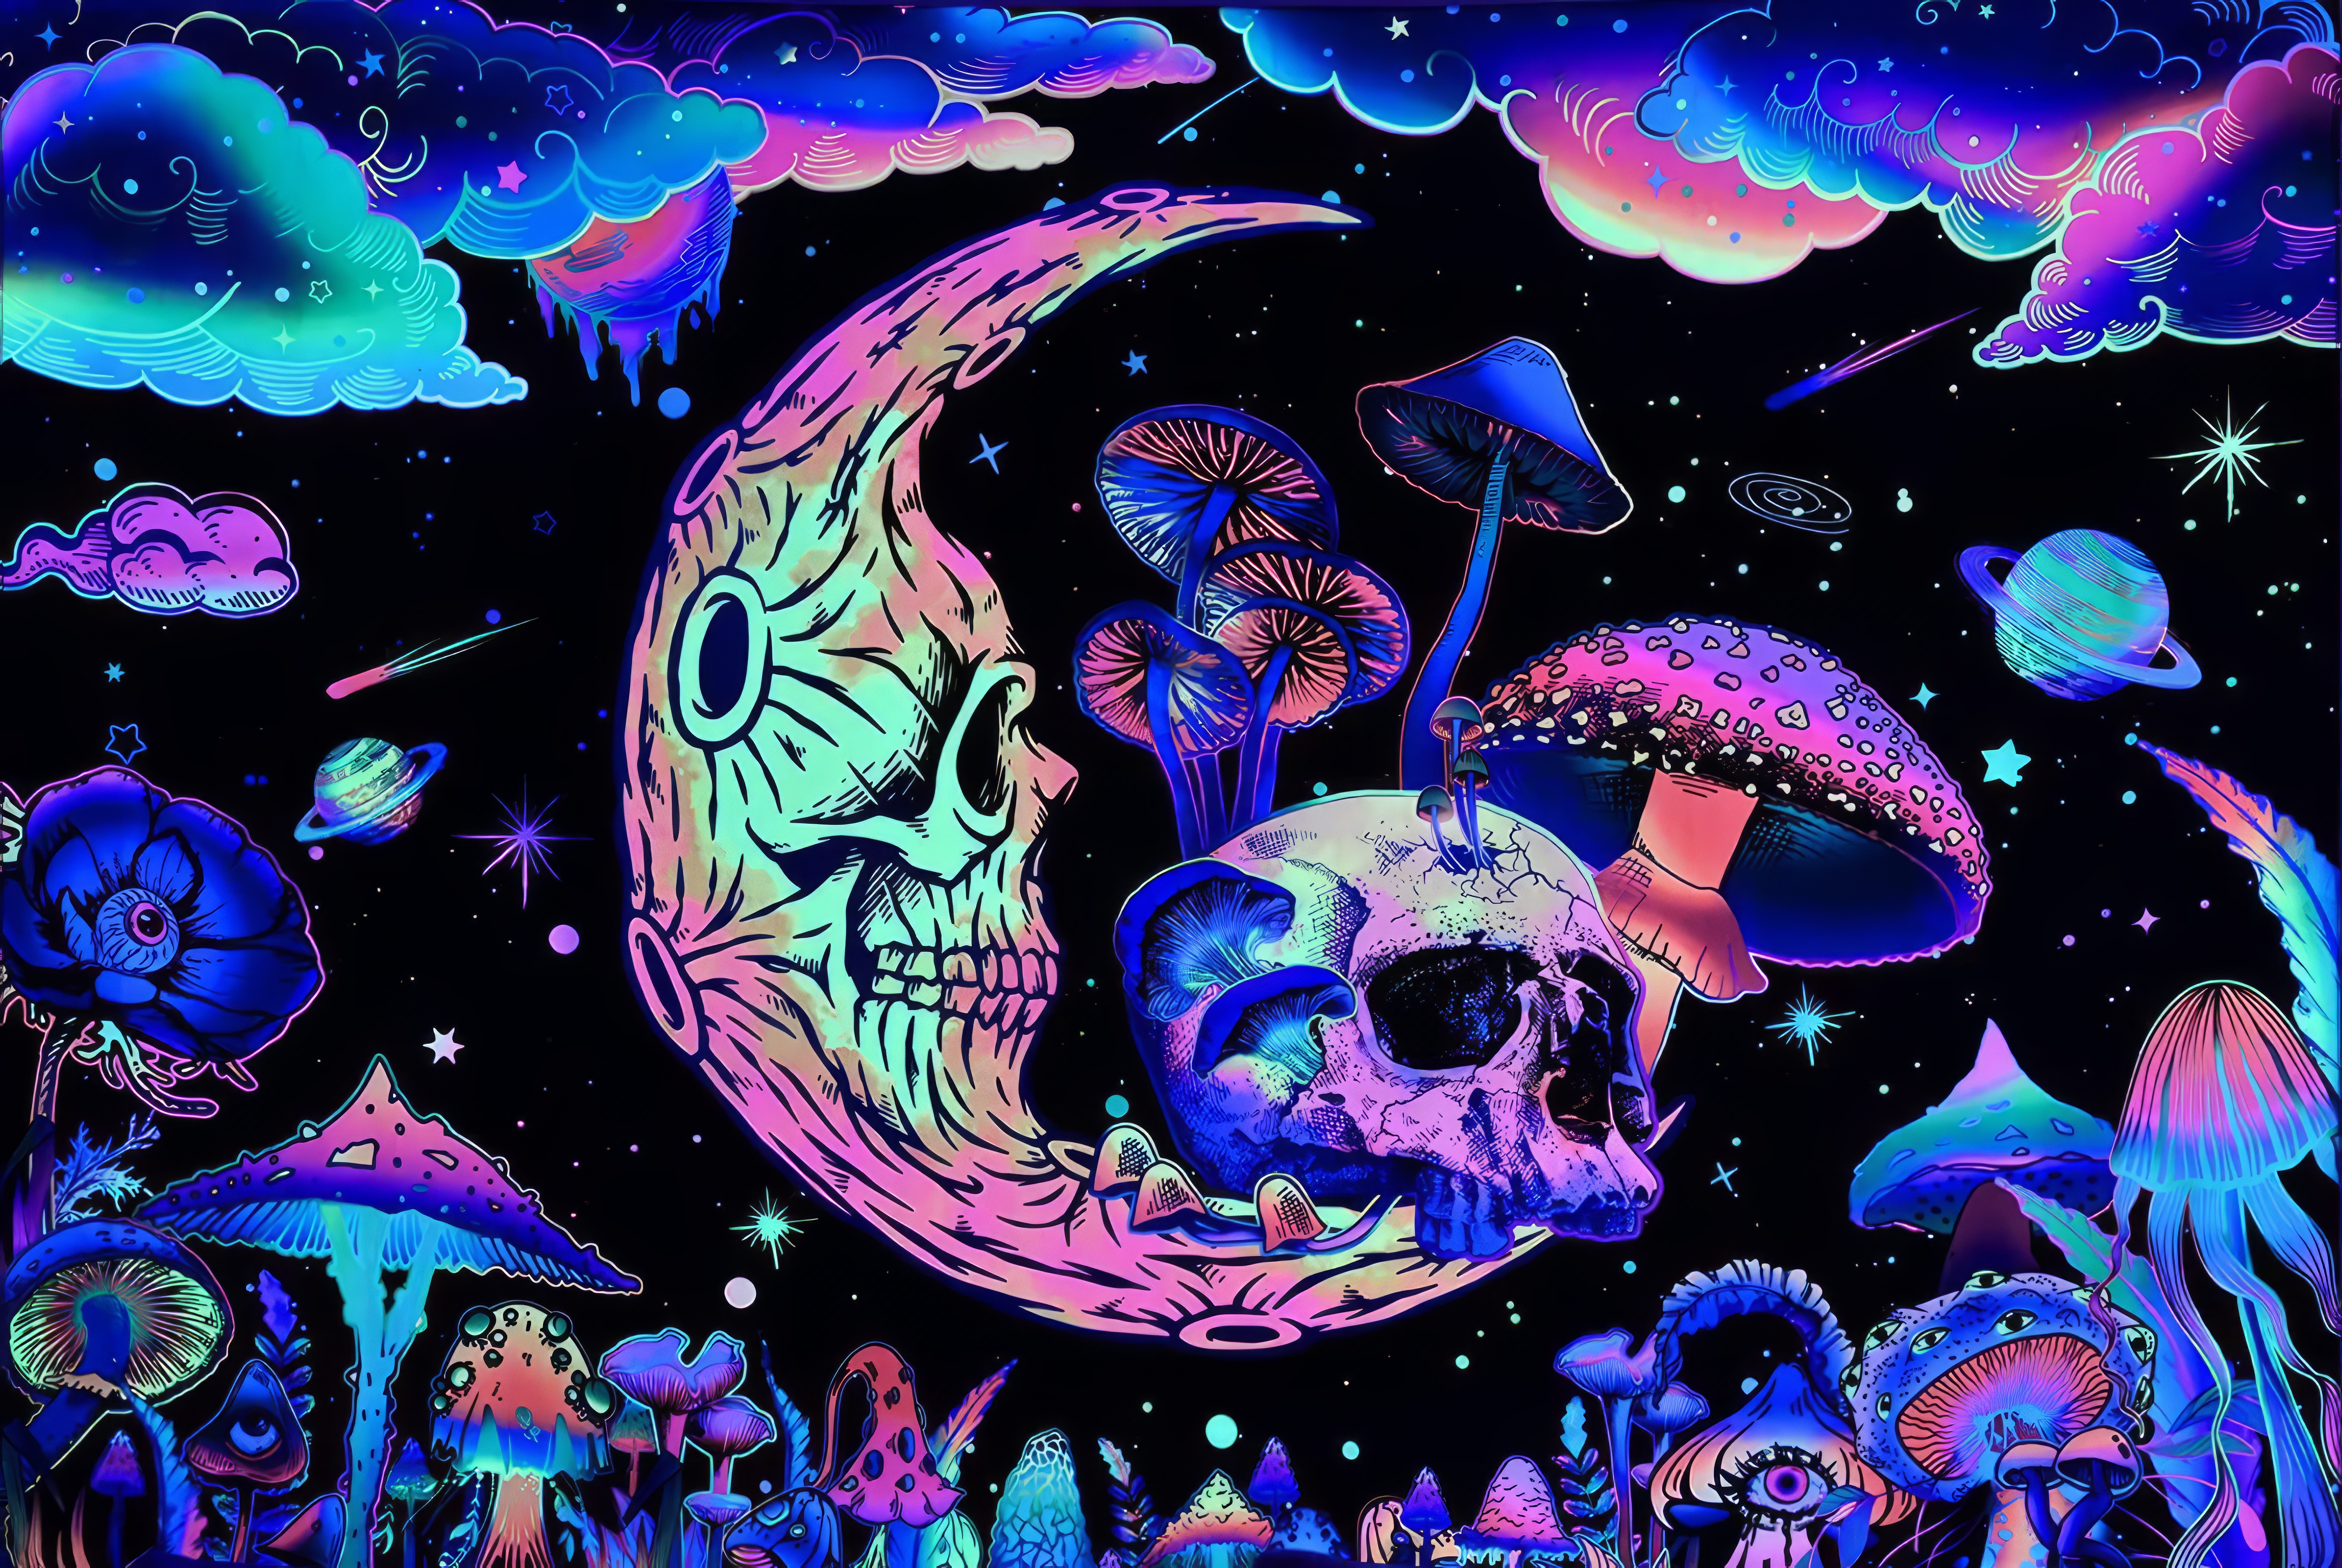 General 5712x3824 drawn neon crescent moon skull mushroom colorful psychedelic galaxy stars planet clouds